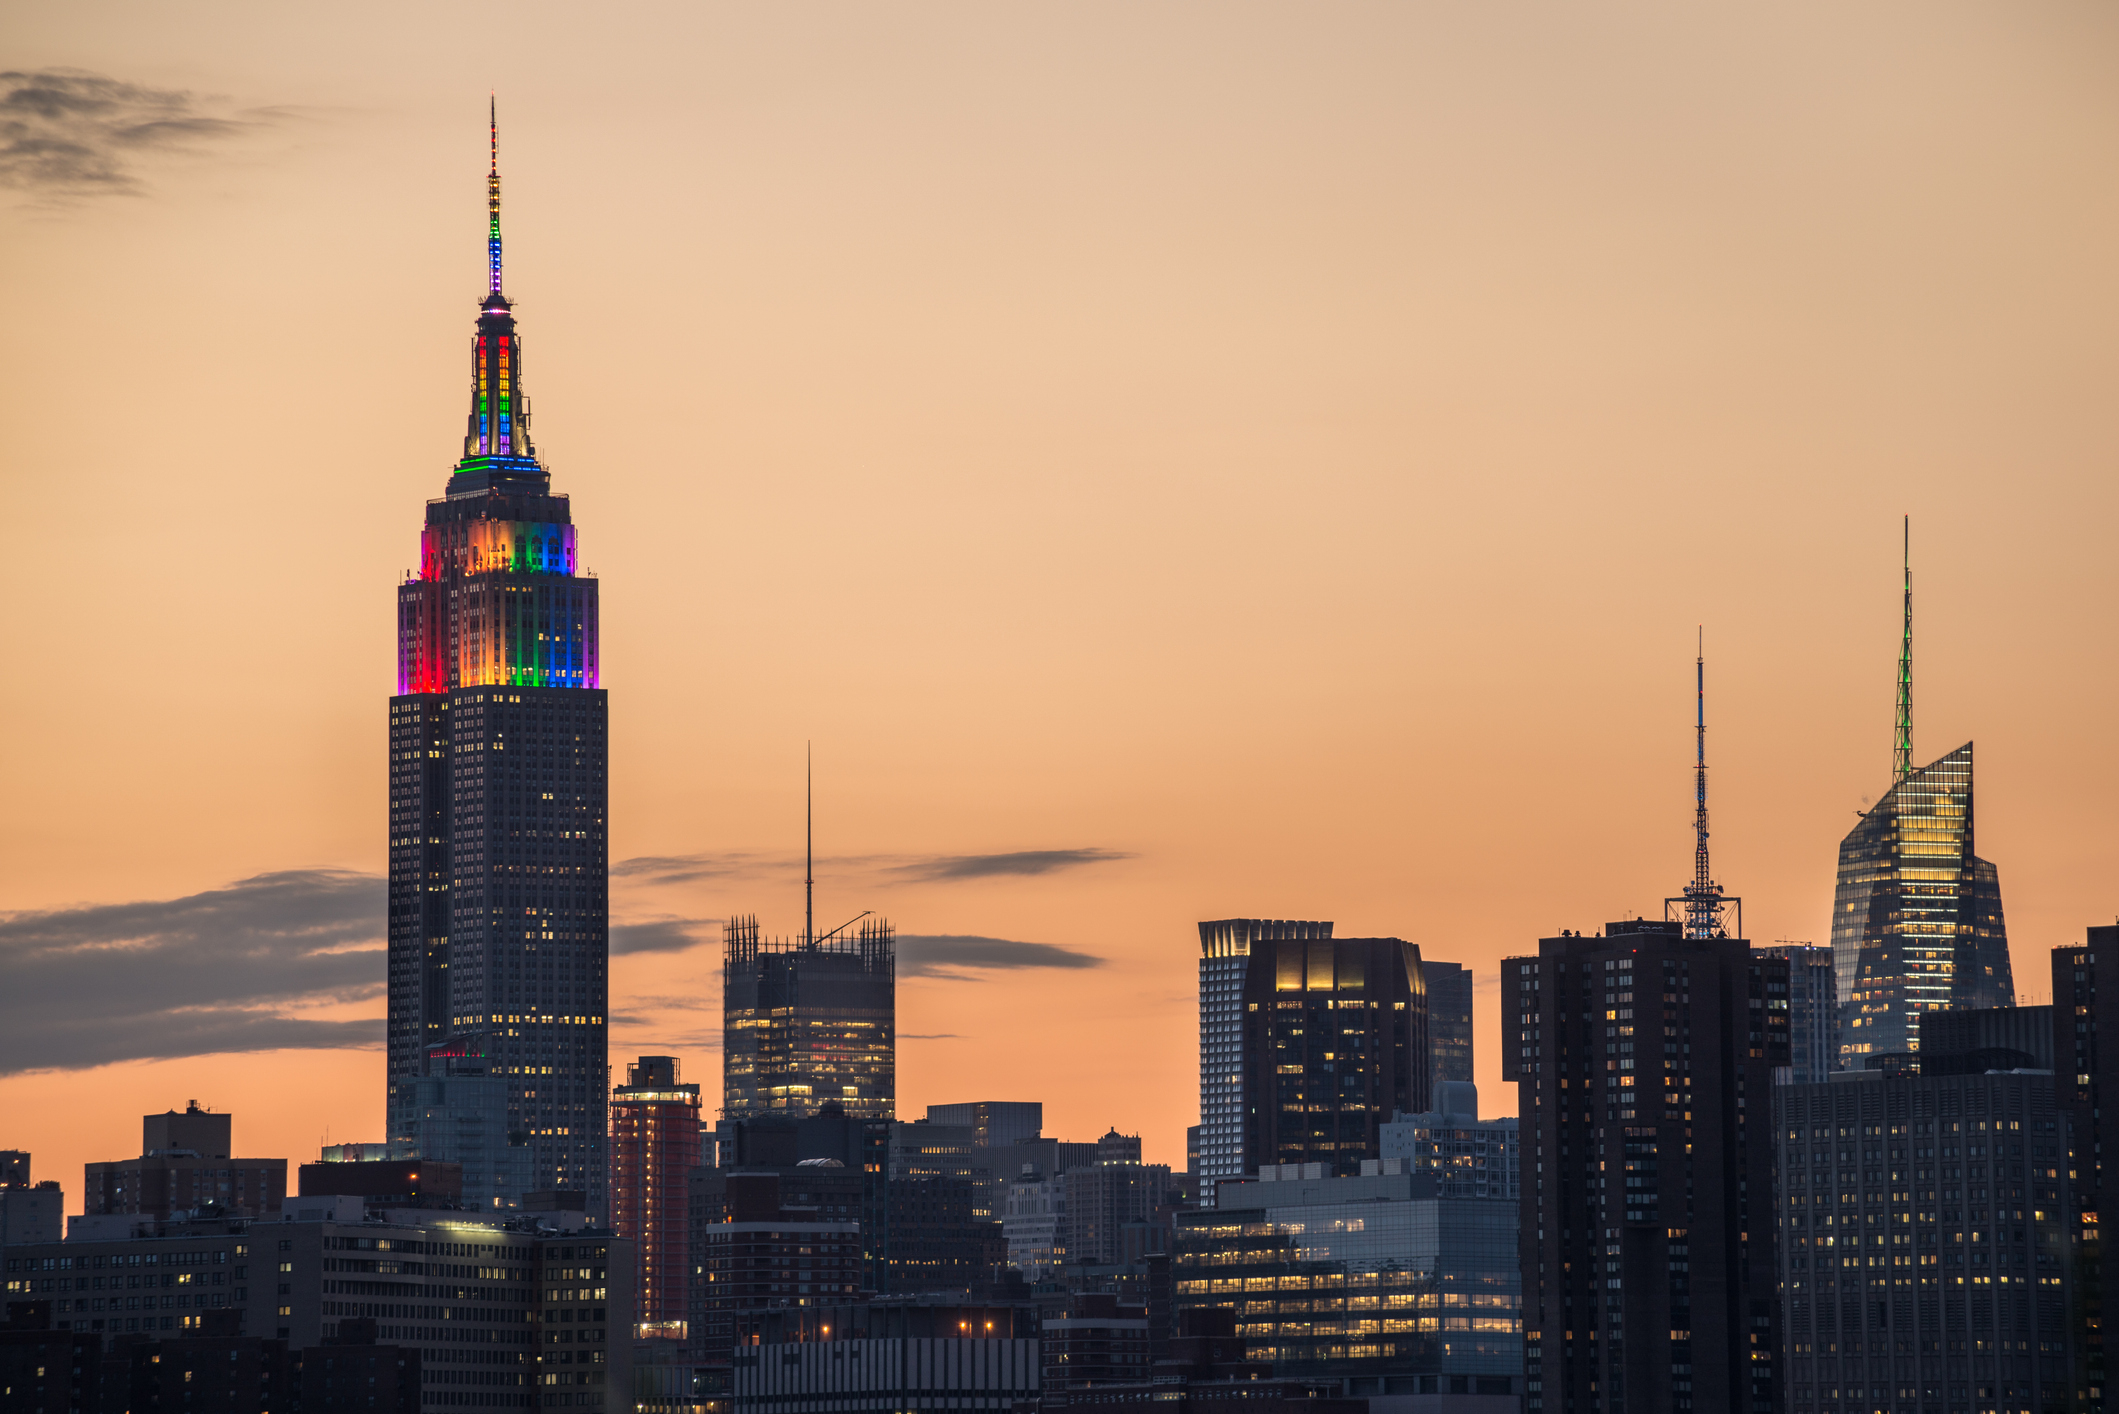 New York City skyline at dusk with the Empire State Building lit up in rainbow colors